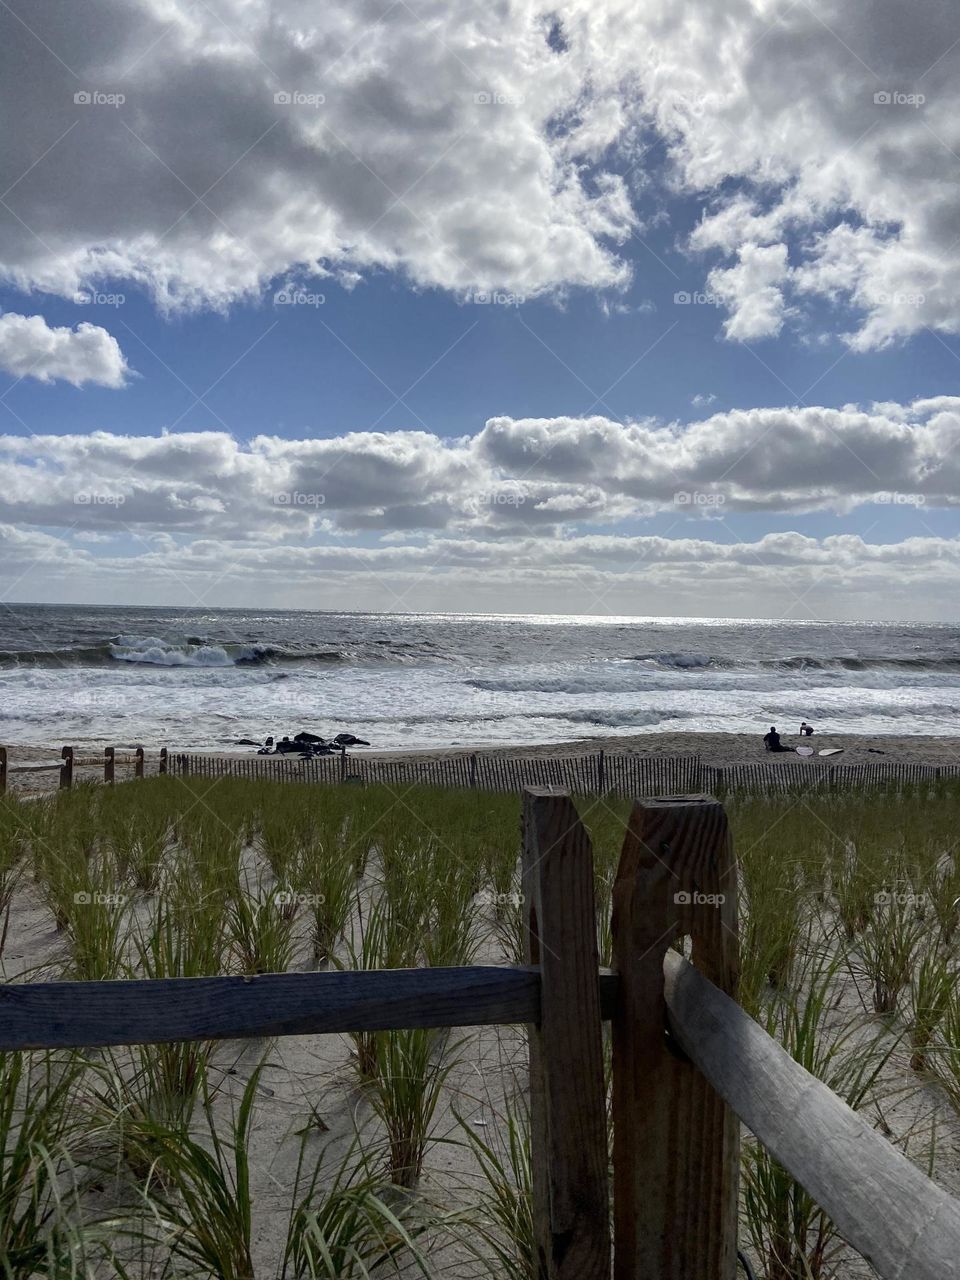 When I look at this photo, my eyes are drawn to the clouds that frame the blue sky. The corner of the fence is aligned with the vertical break in the clouds on the right, and the whitecaps in the ocean resemble another line of clouds on the sand. 